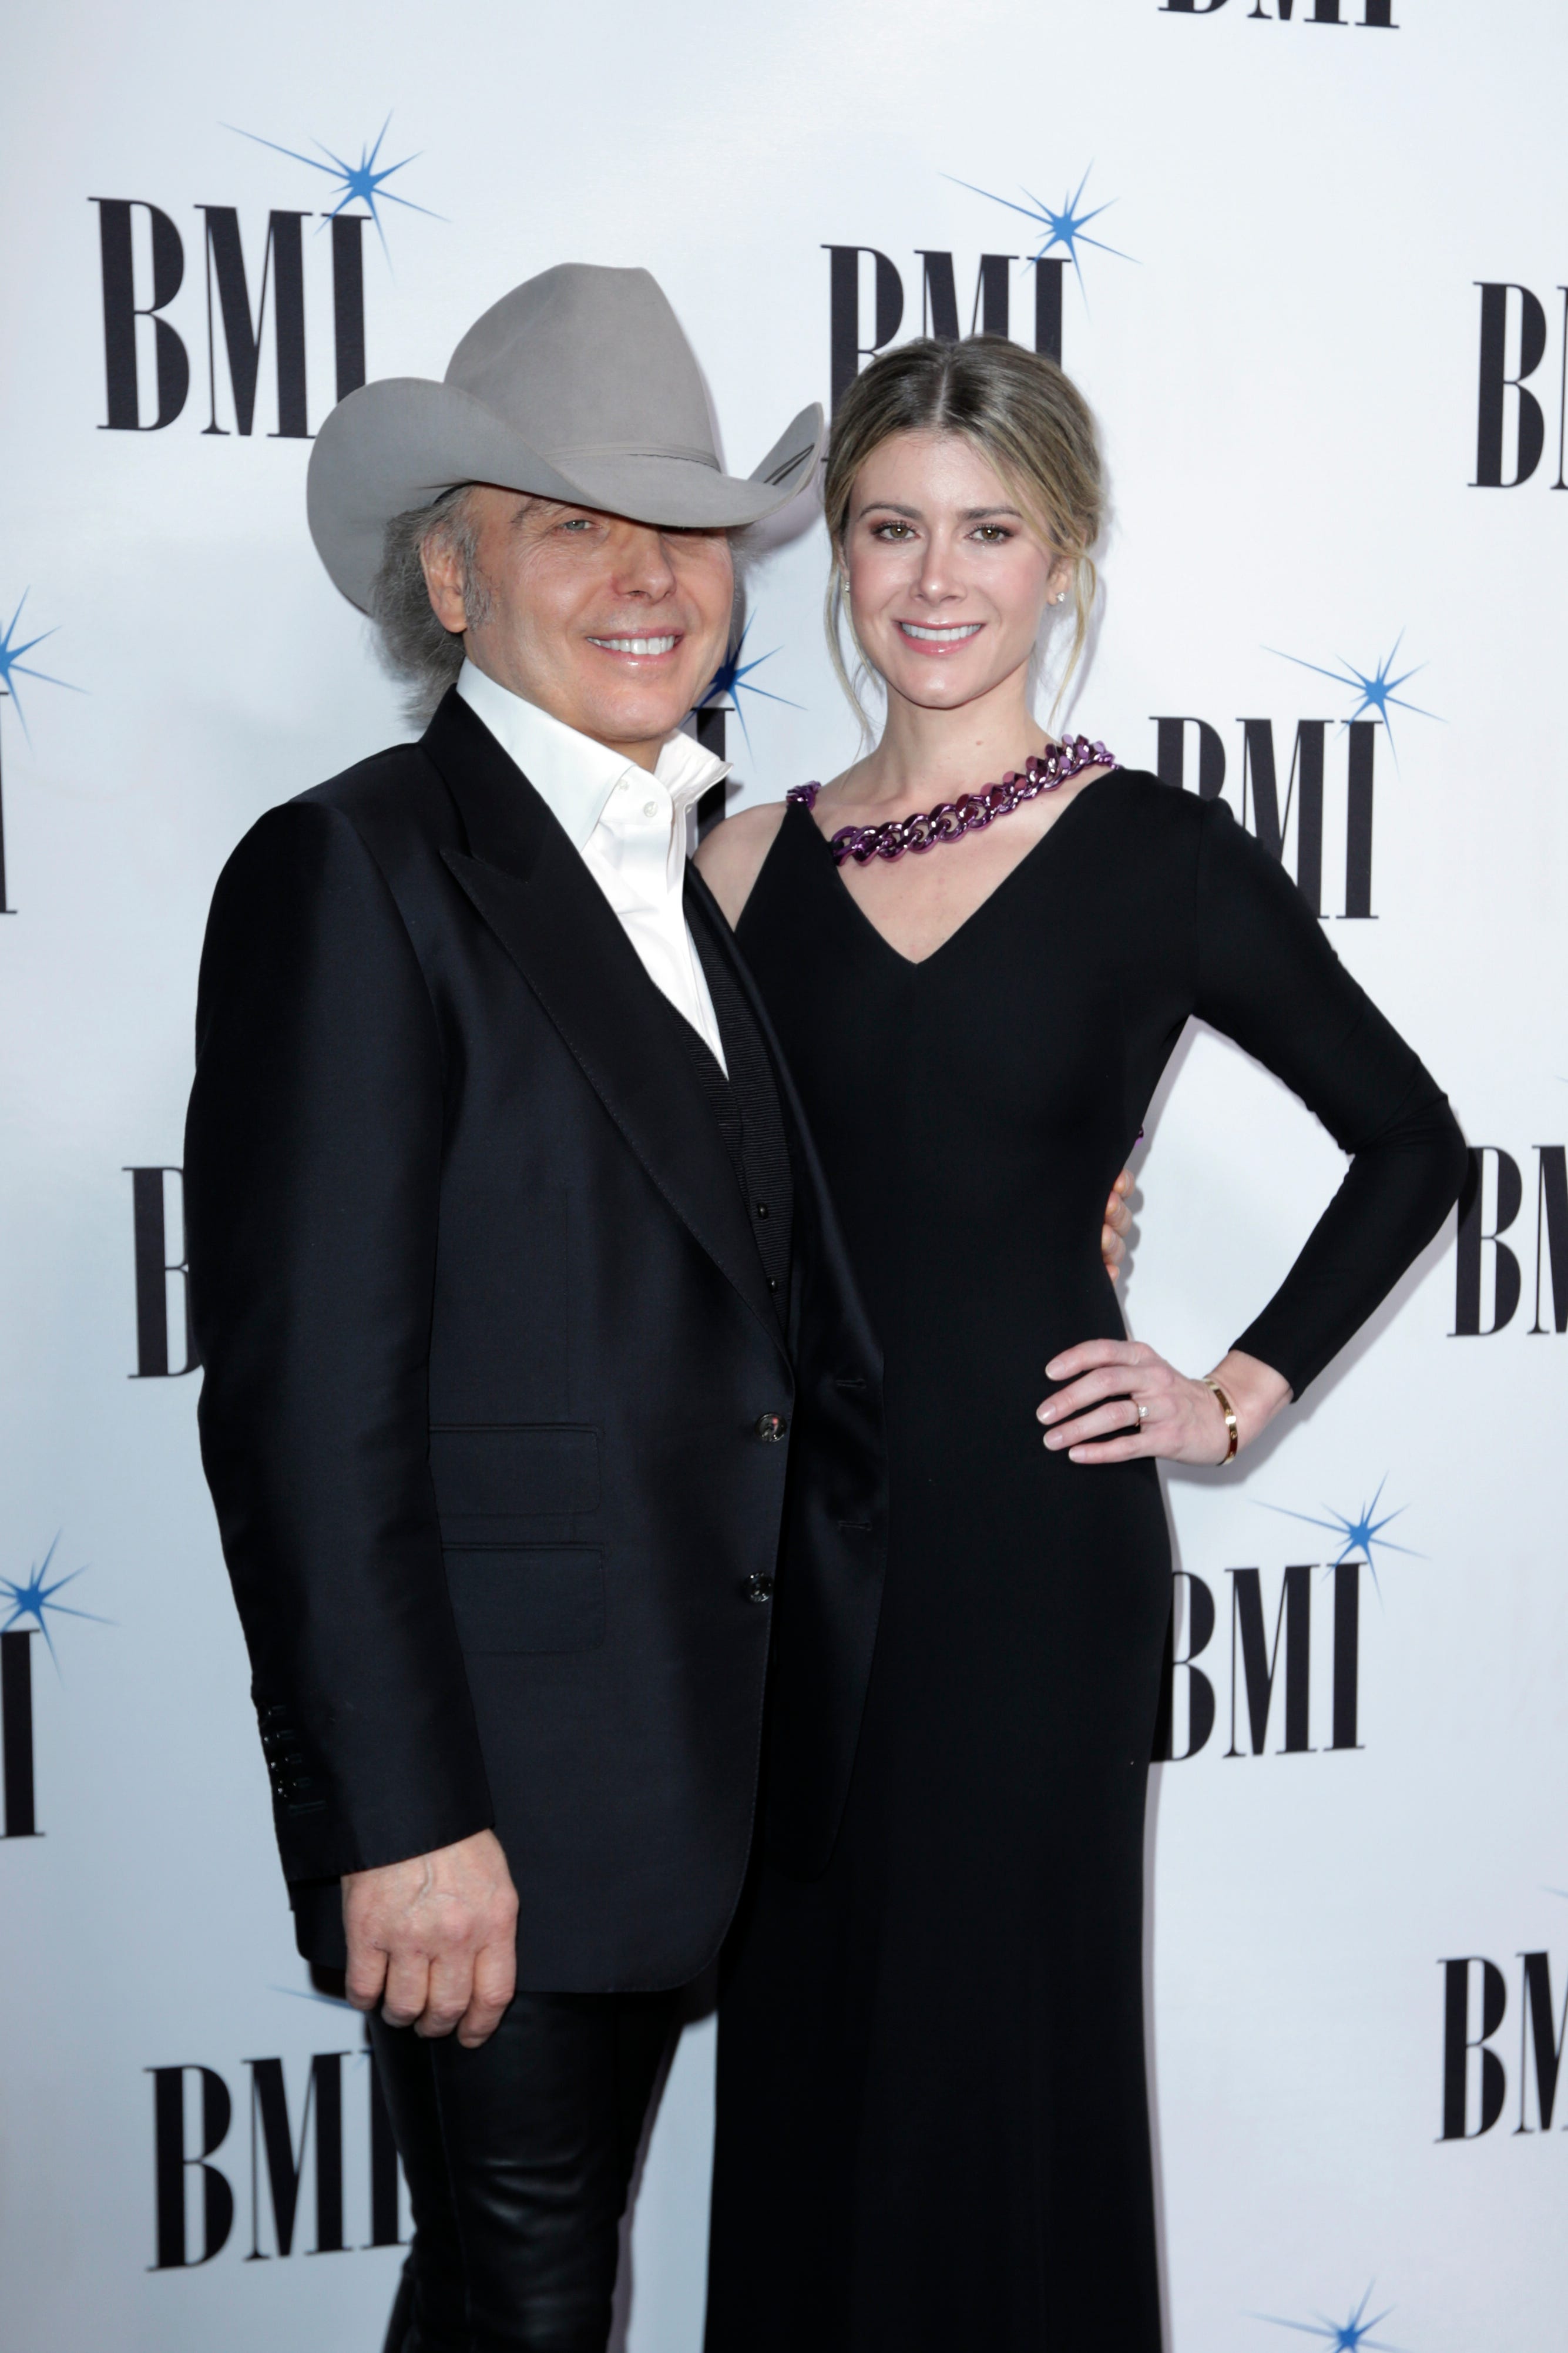 Dwight Yoakam Has Small Wedding With Guests Seated 6 Feet Apart